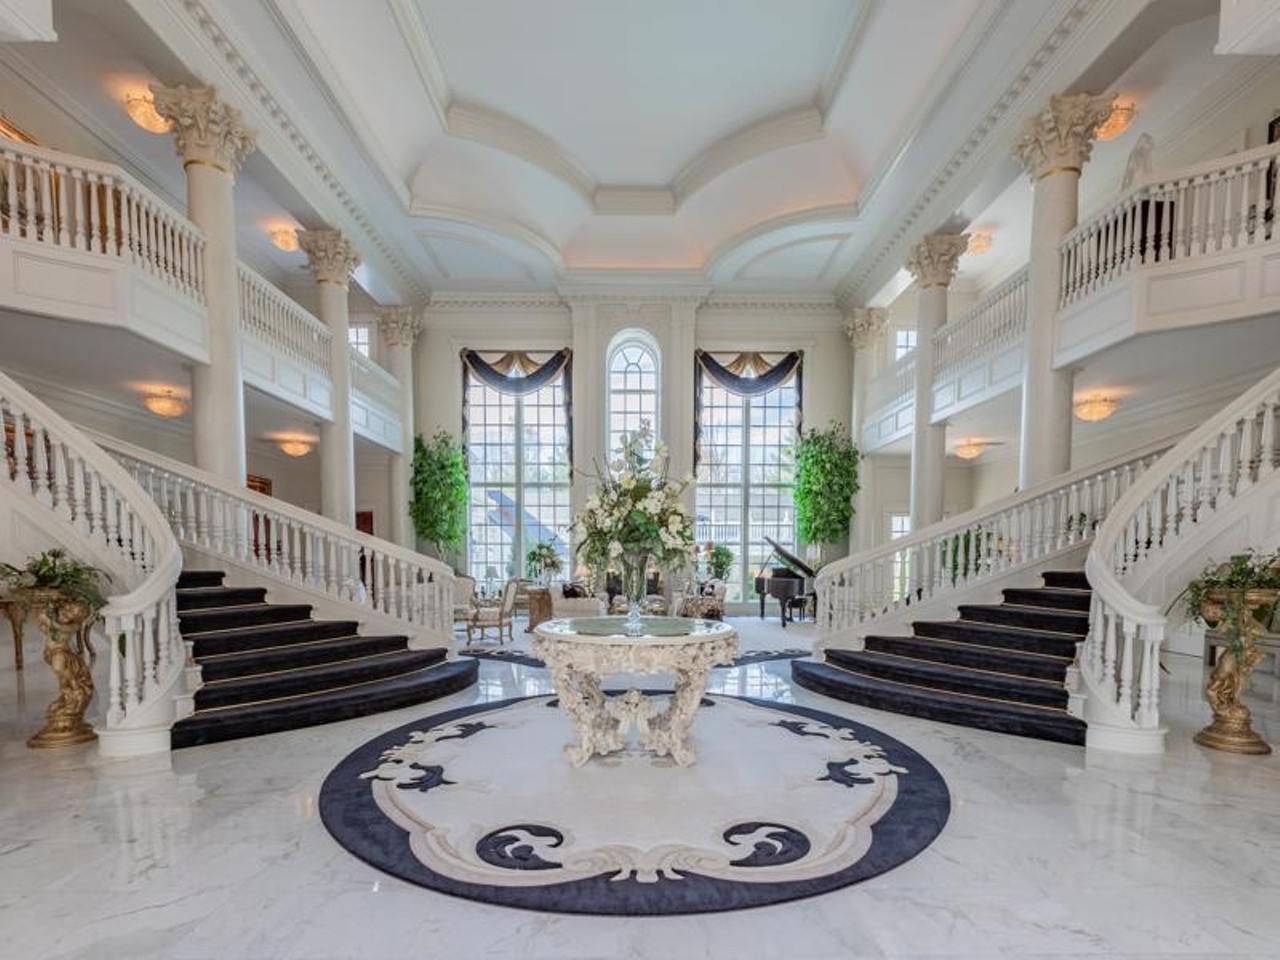 This Southern Indiana Mansion Looks Like The White House [PHOTOS]